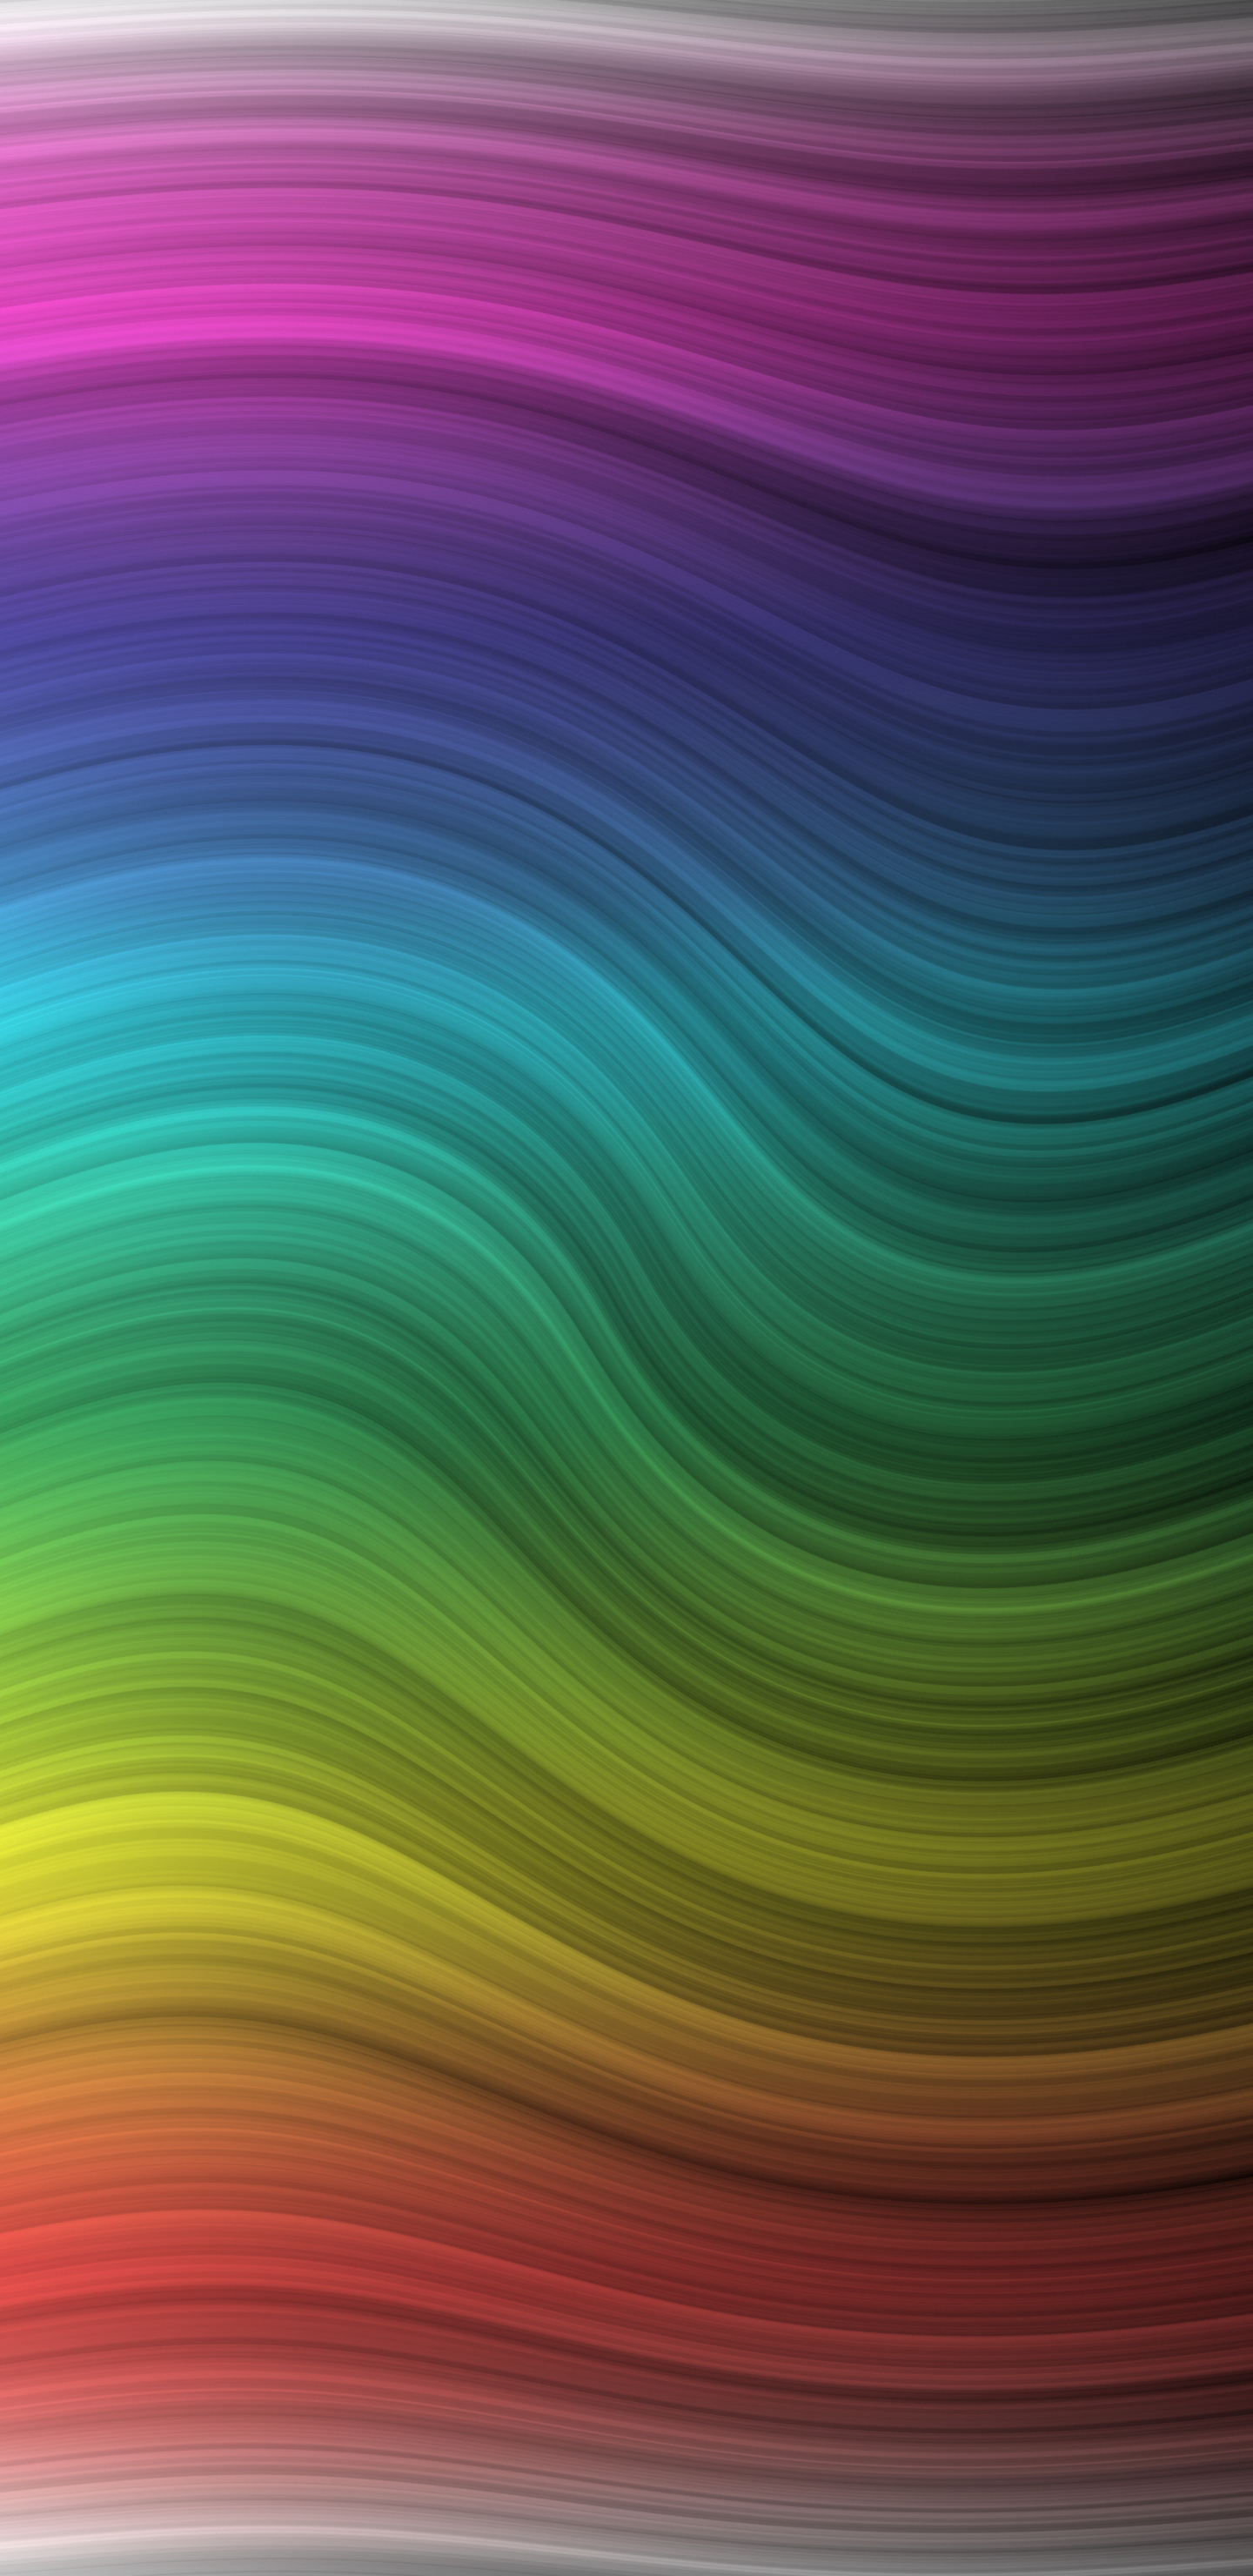 Download 1440x2960 Wallpaper Waves Colorful Rainbow Samsung